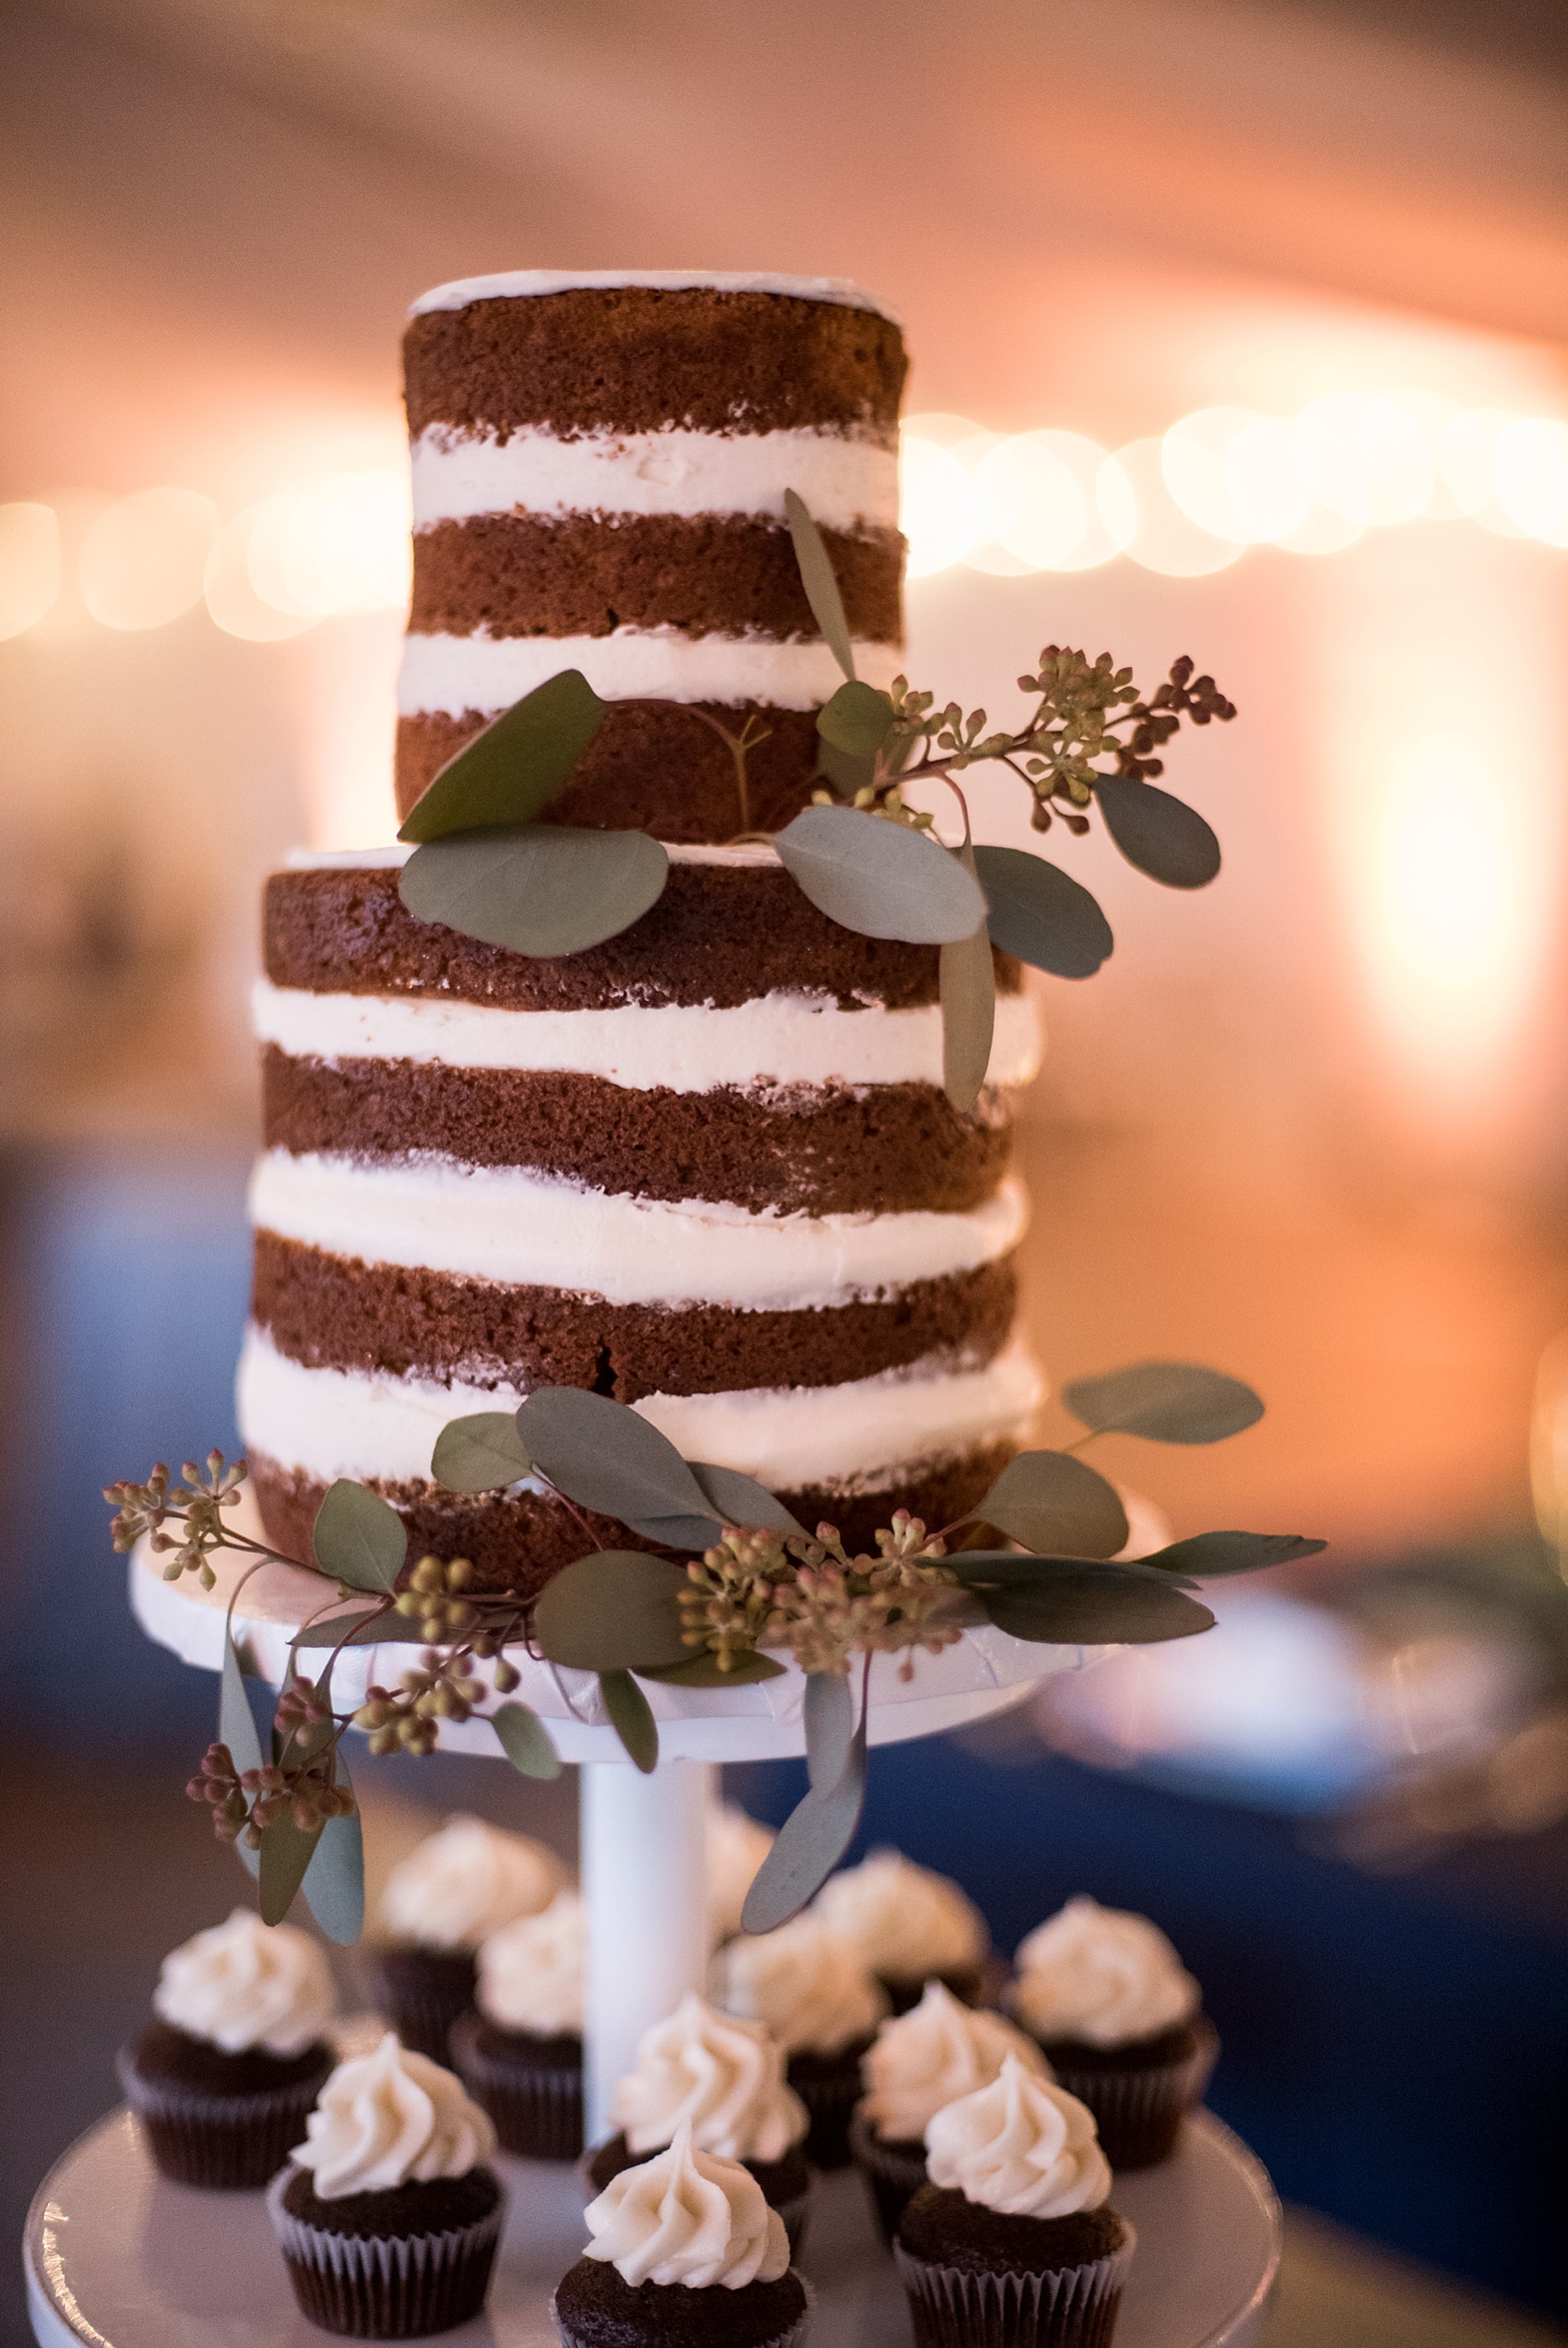 Raleigh North Carolina wedding photographer Mikkel Paige visits Merrimon-Wynne bridal event, featuring cake design by Cupcake Shoppe and Simply Elegant Floral Design. 